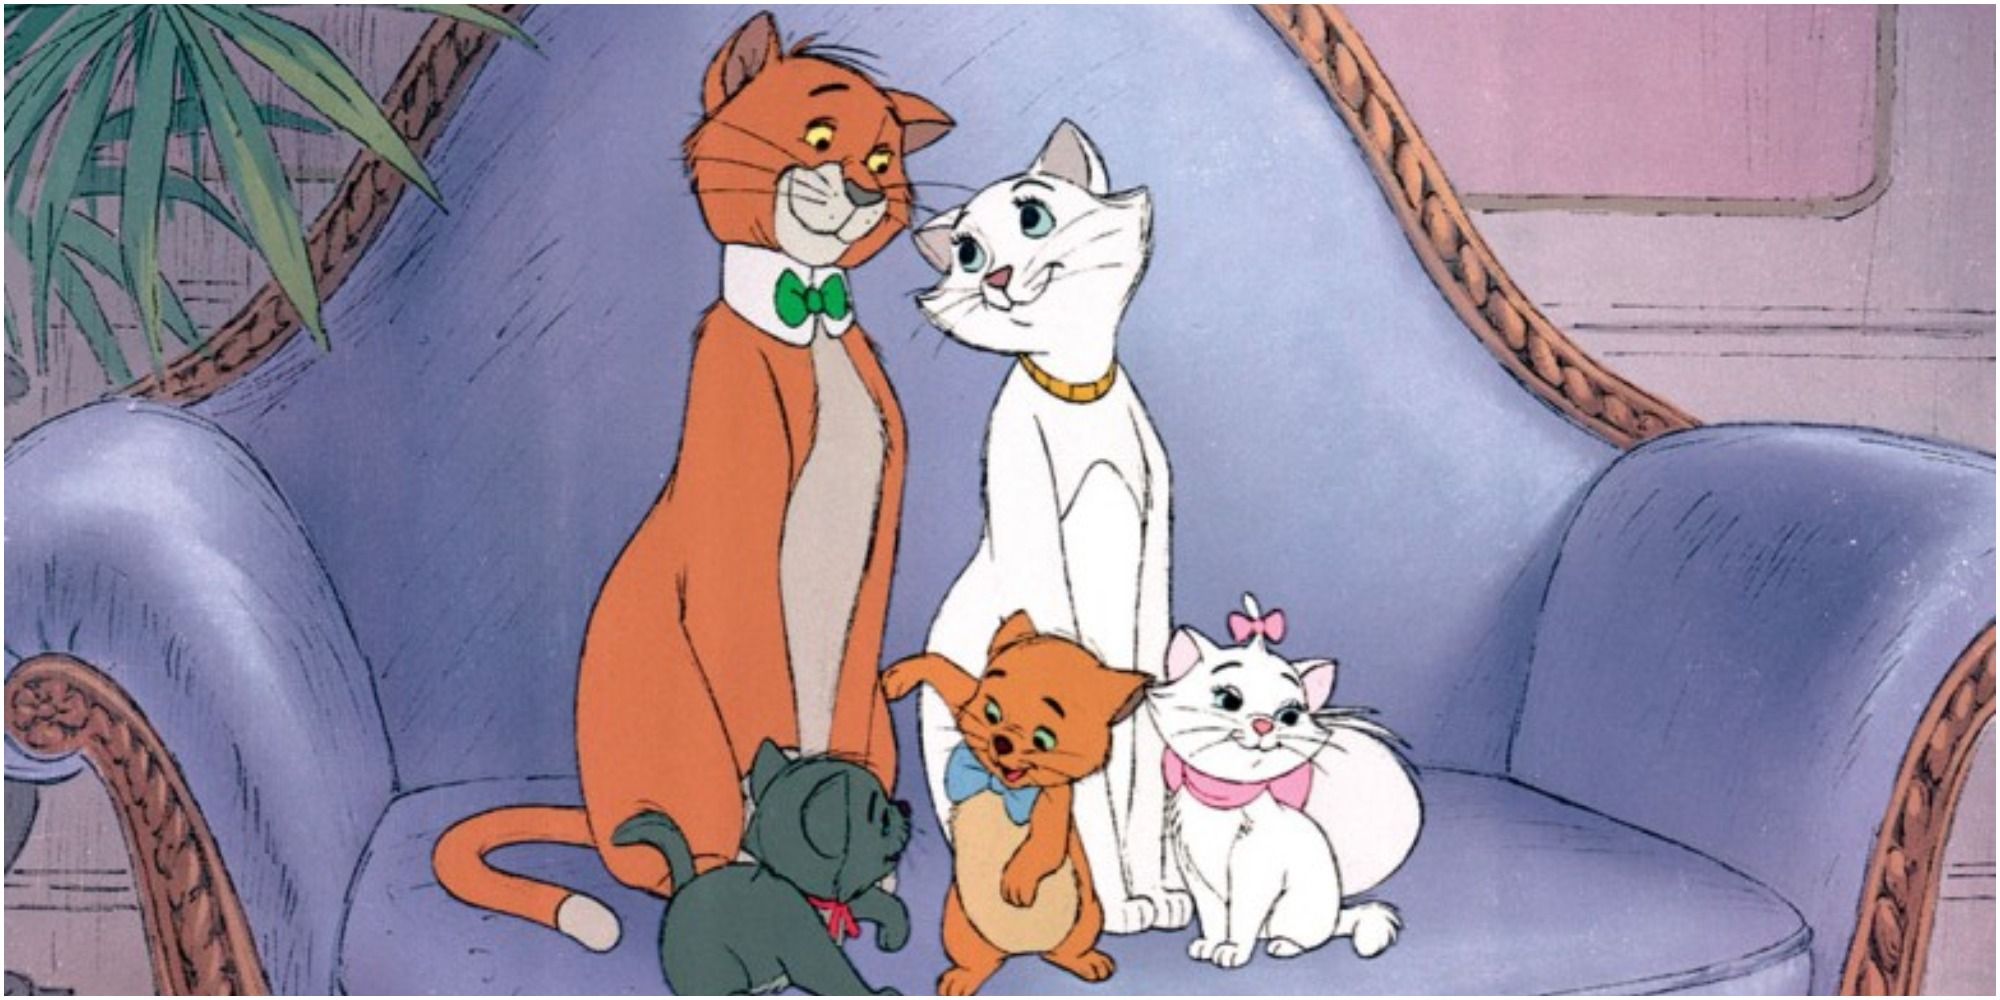 The family of cats from The Artistocats